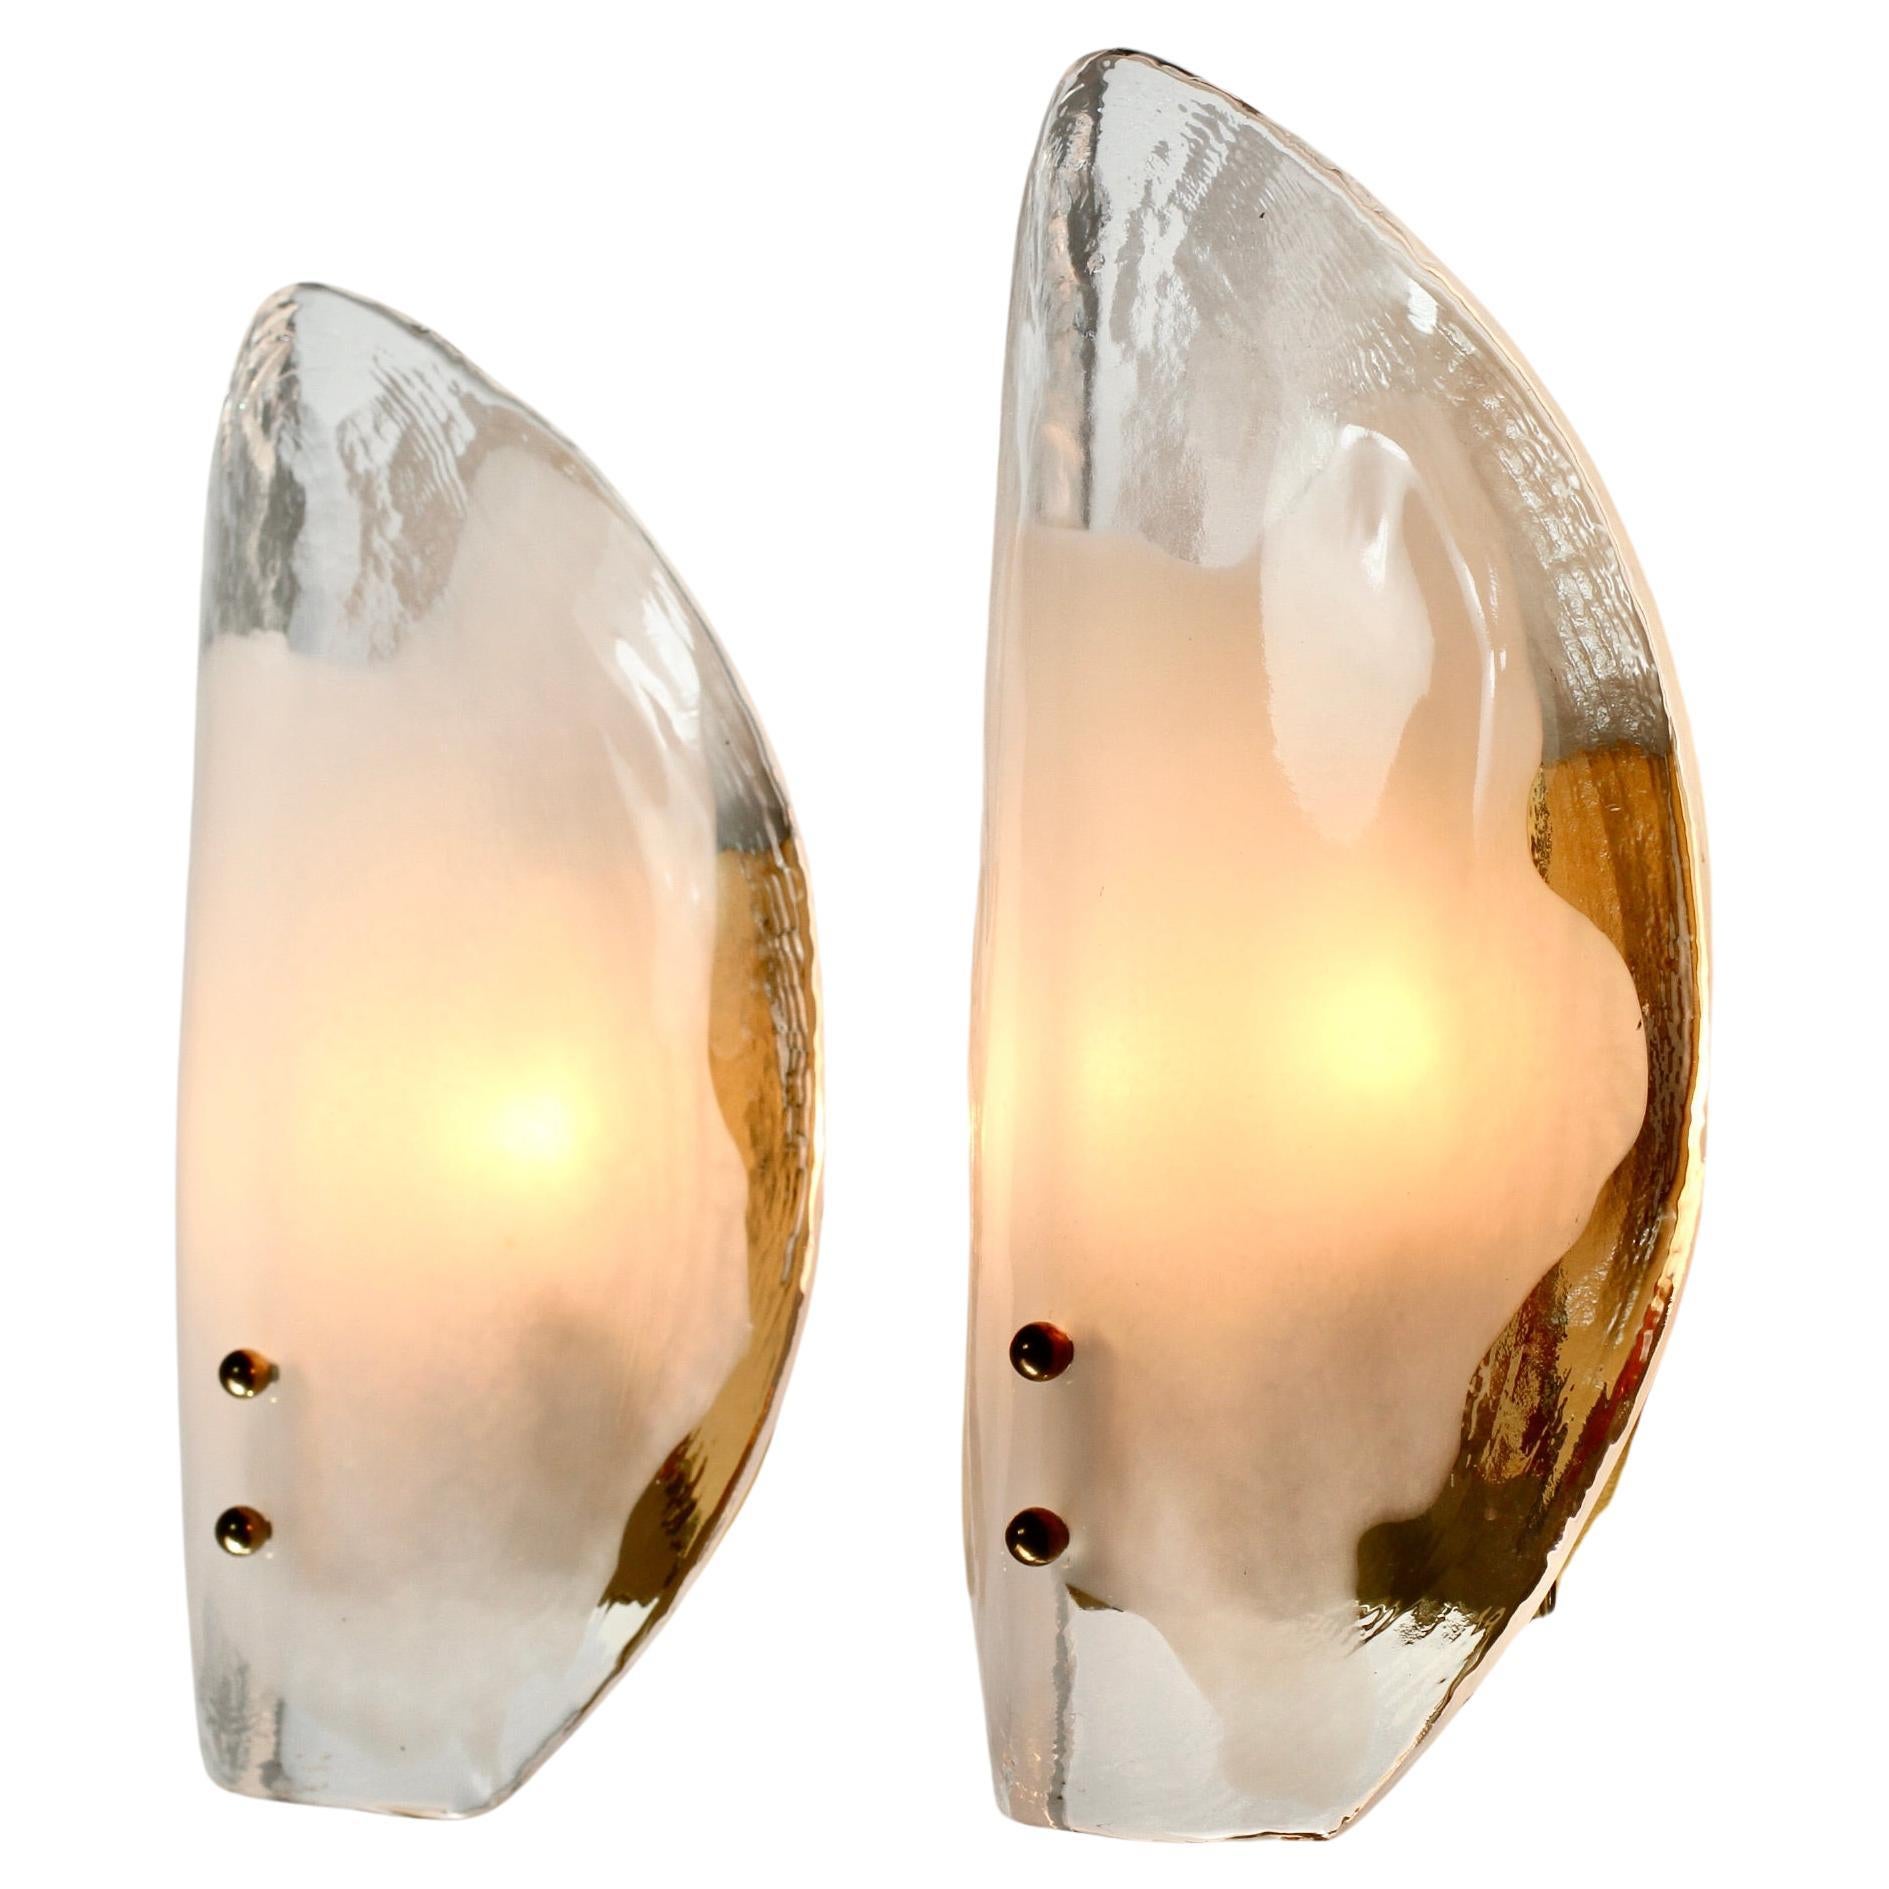 1 of 8 Pairs of Midcentury Kalmar Mazzega Murano Glass Wall Lights Sconces 1970s For Sale